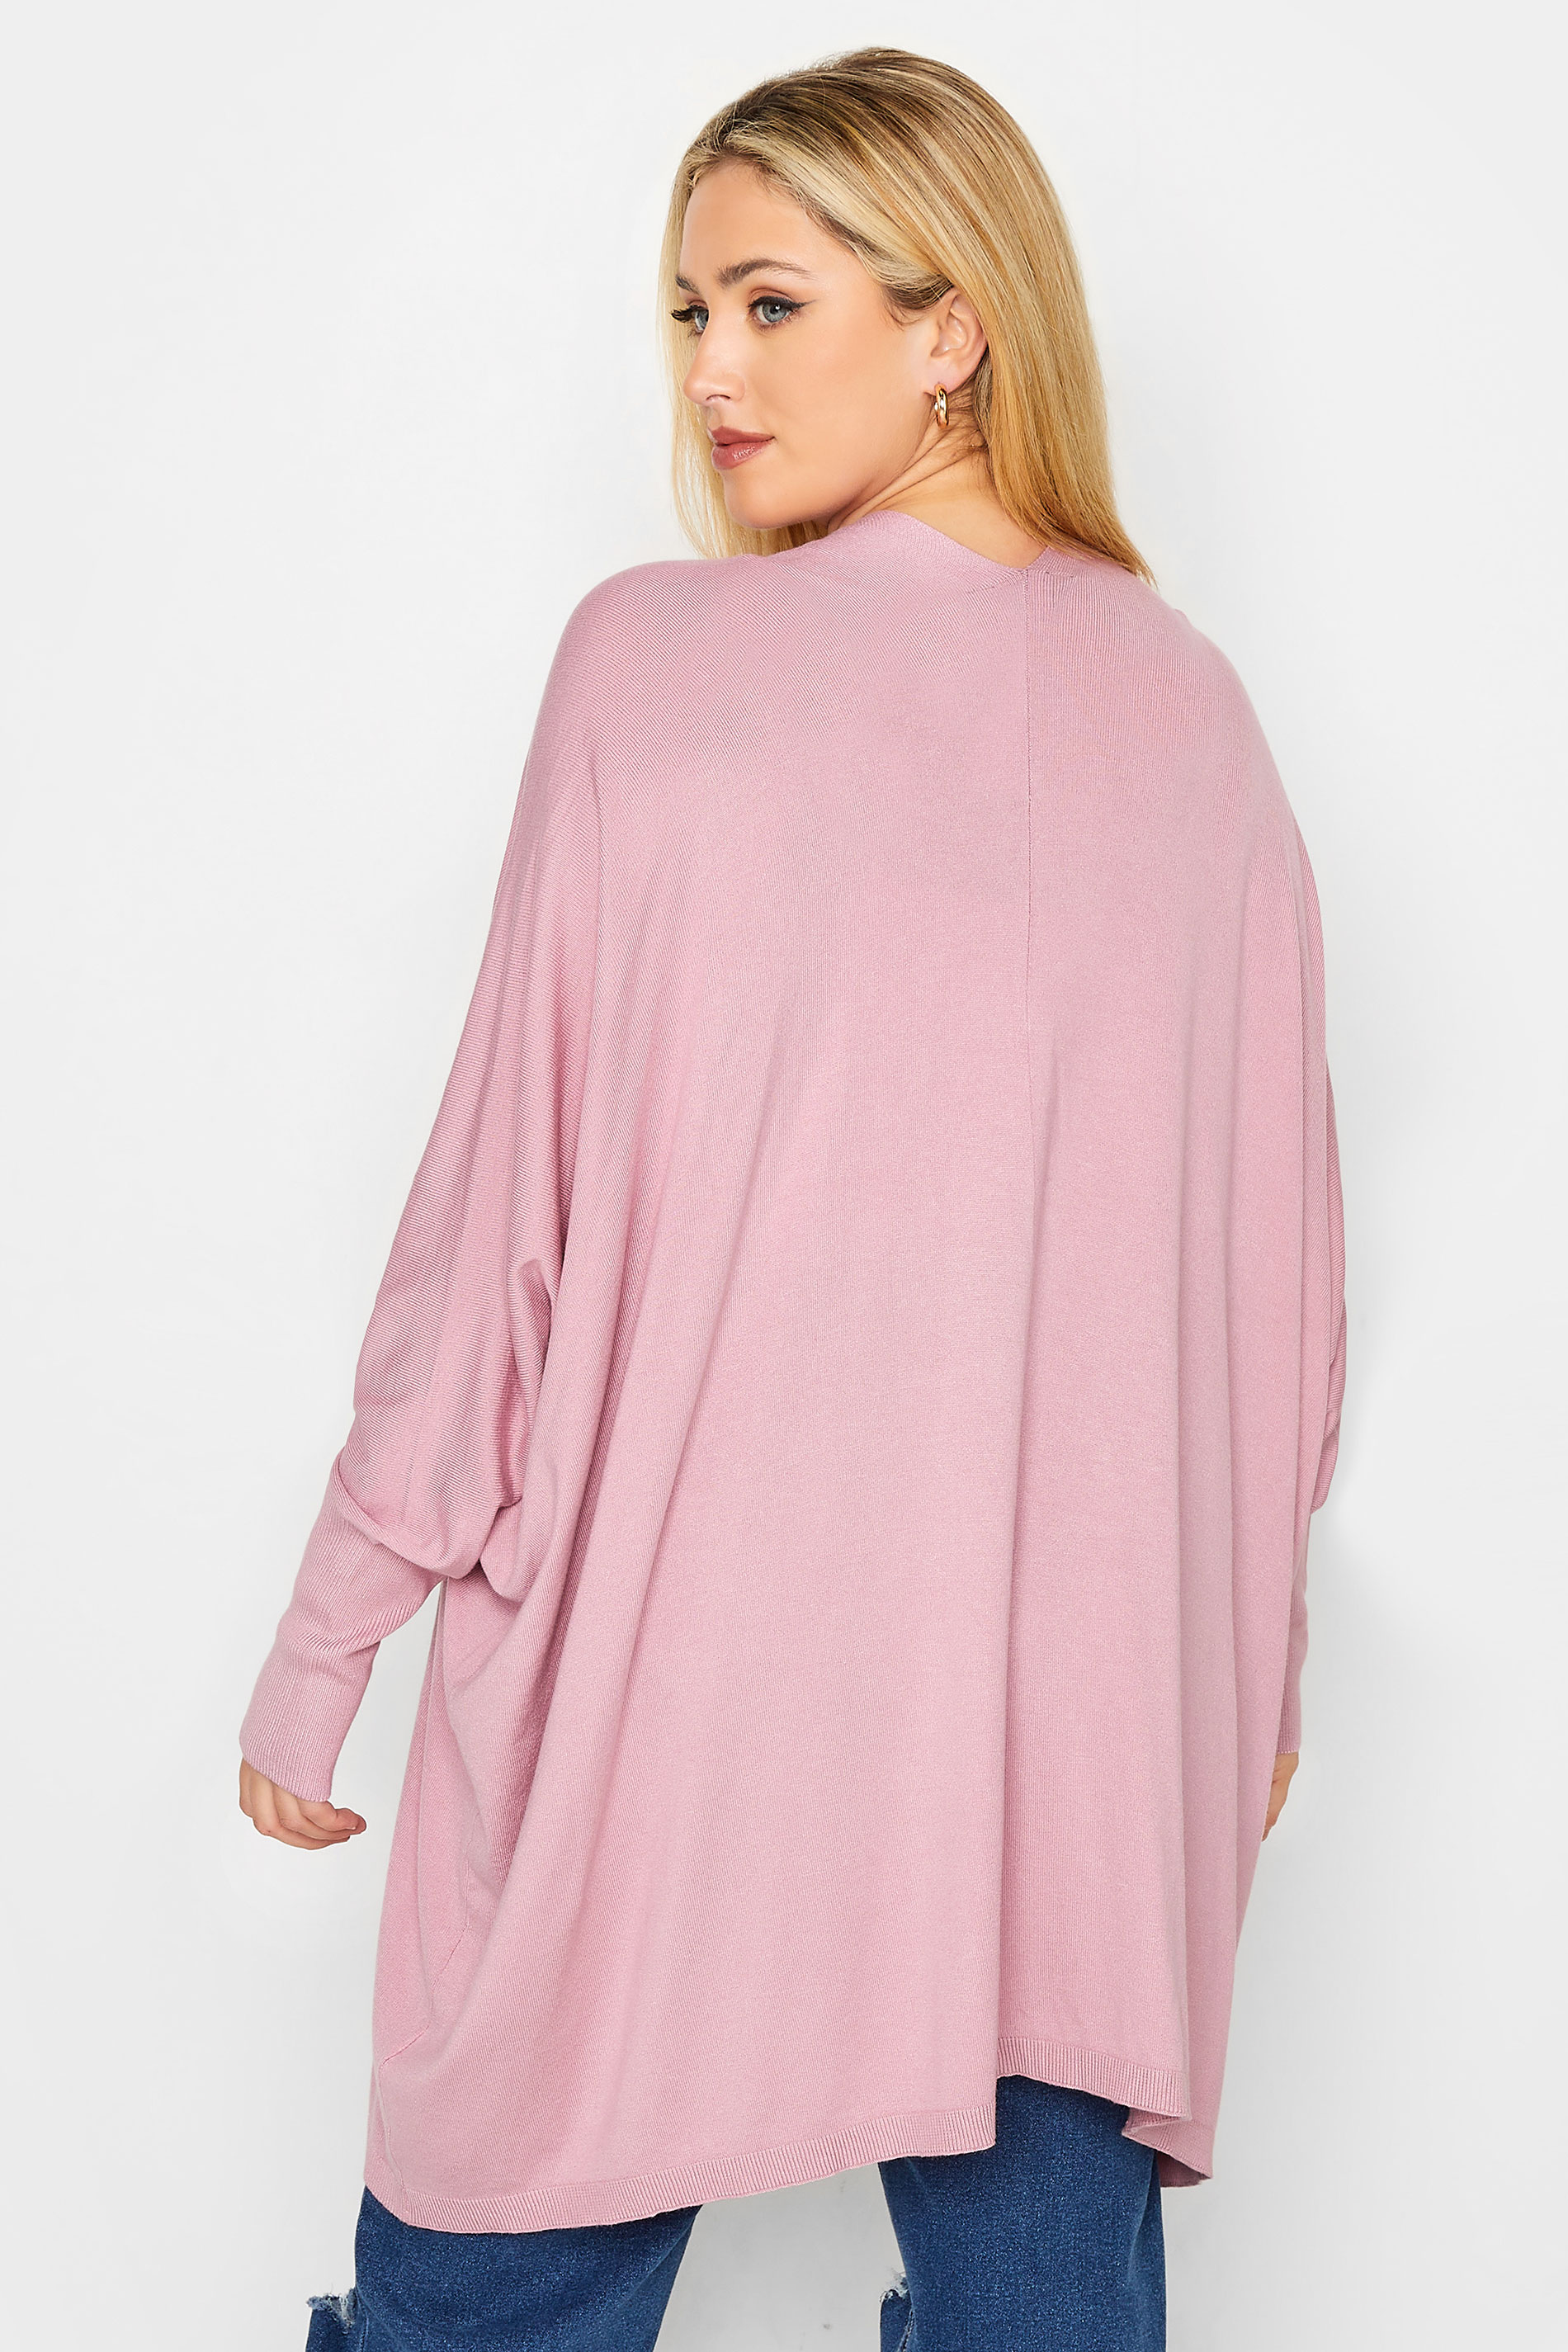 YOURS Plus Size Pink Batwing Sleeve Cardigan | Yours Clothing 3